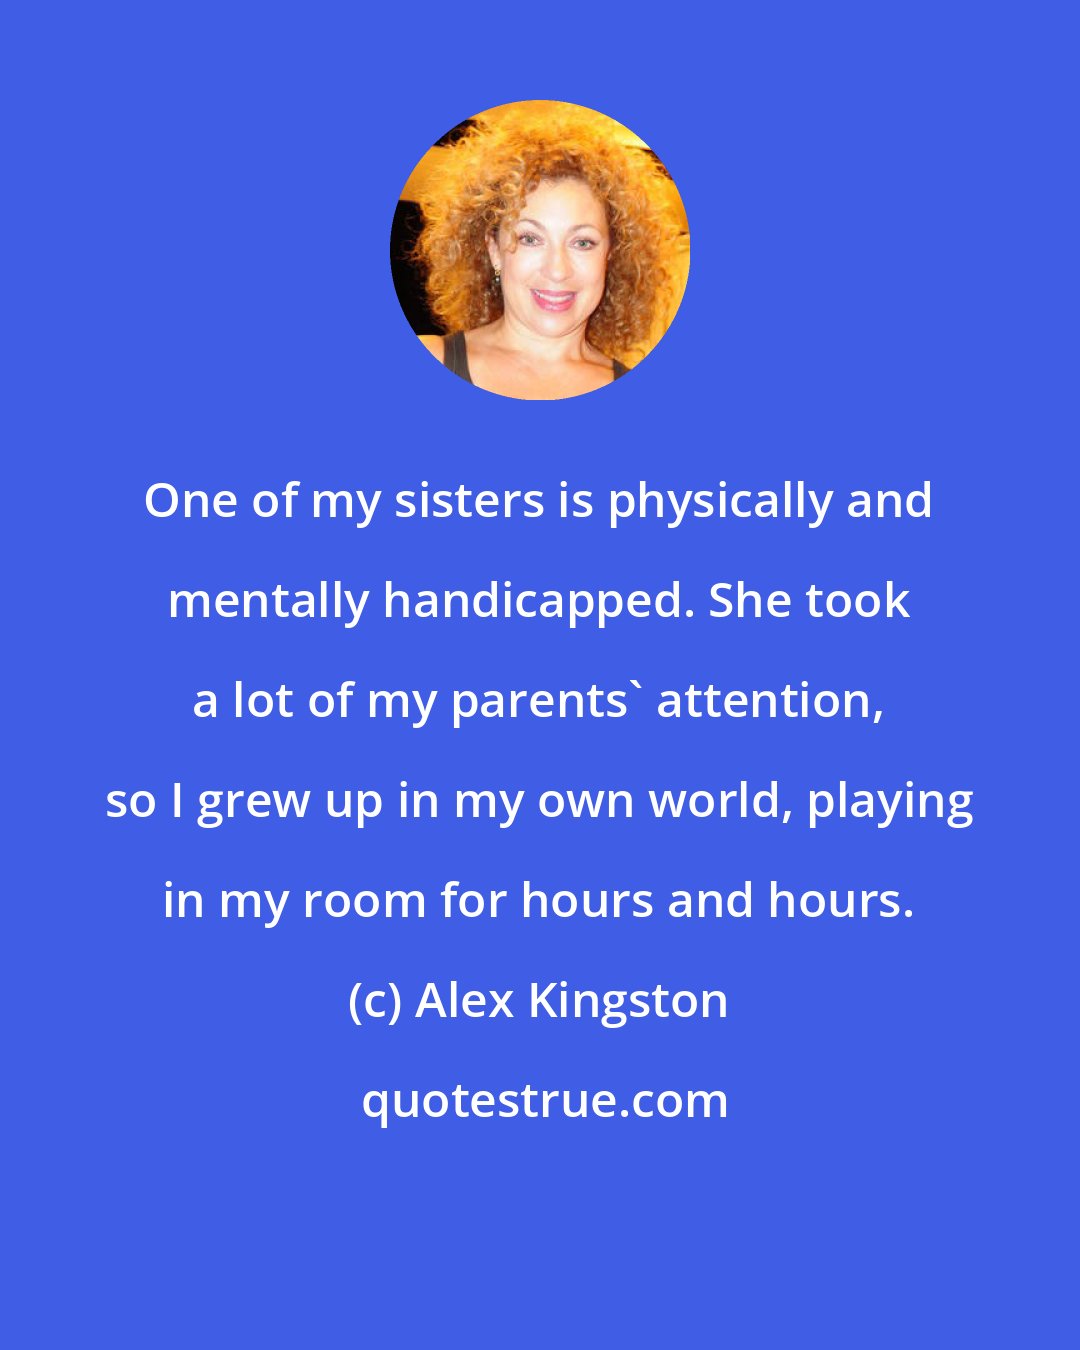 Alex Kingston: One of my sisters is physically and mentally handicapped. She took a lot of my parents' attention, so I grew up in my own world, playing in my room for hours and hours.